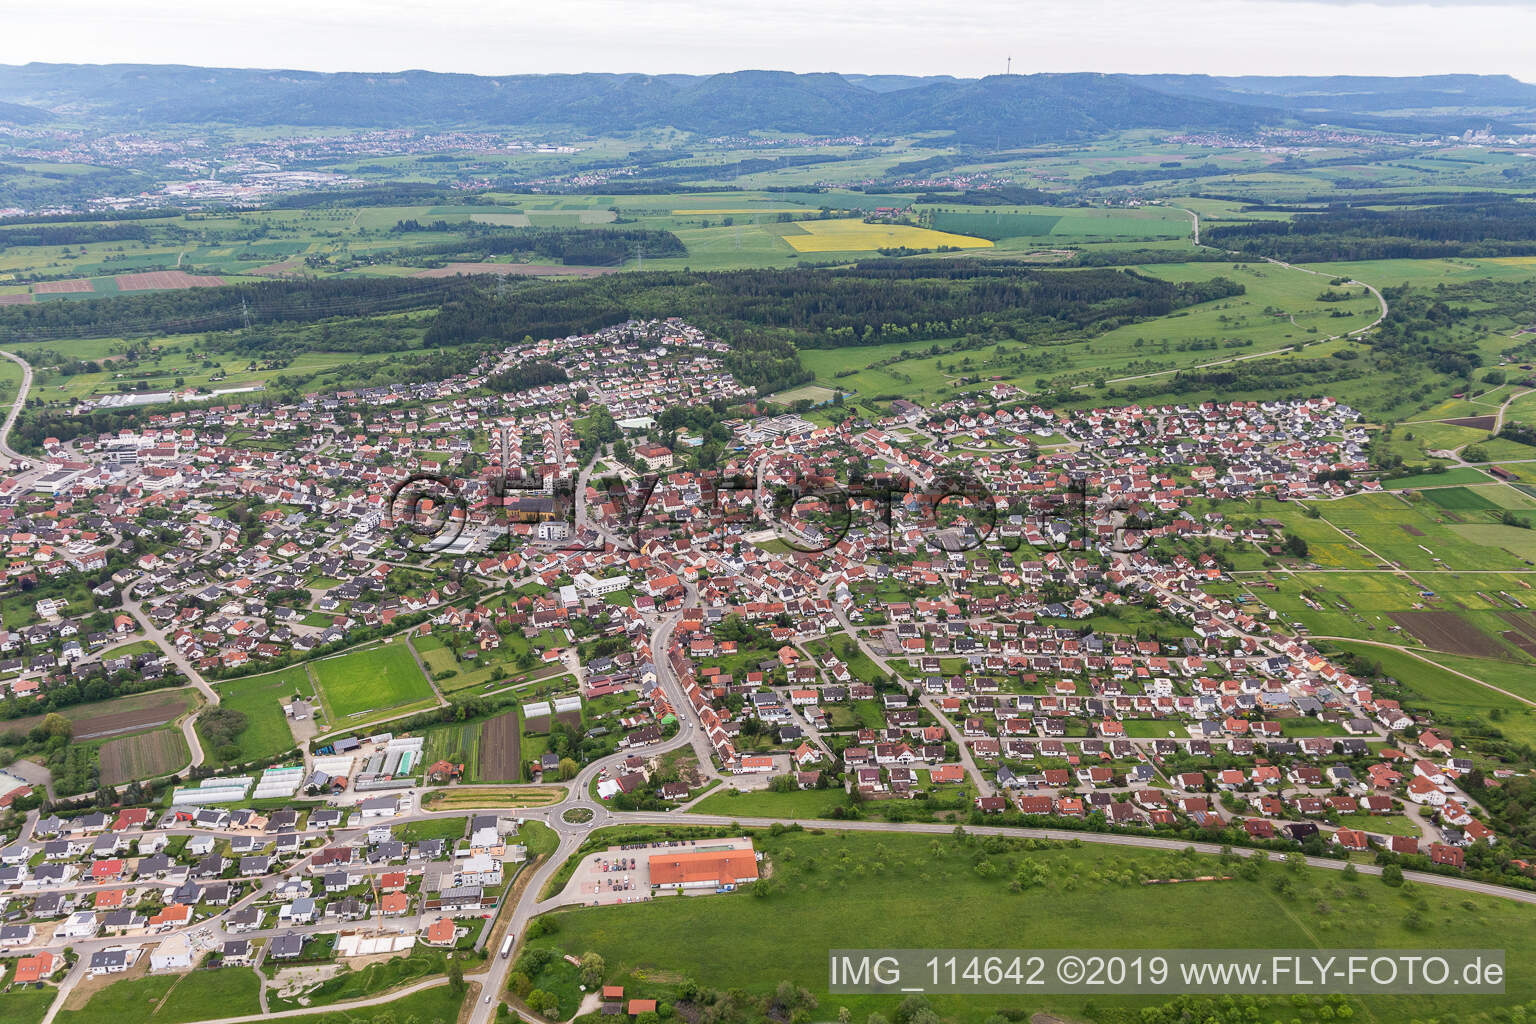 Geislingen in the state Baden-Wuerttemberg, Germany from the plane